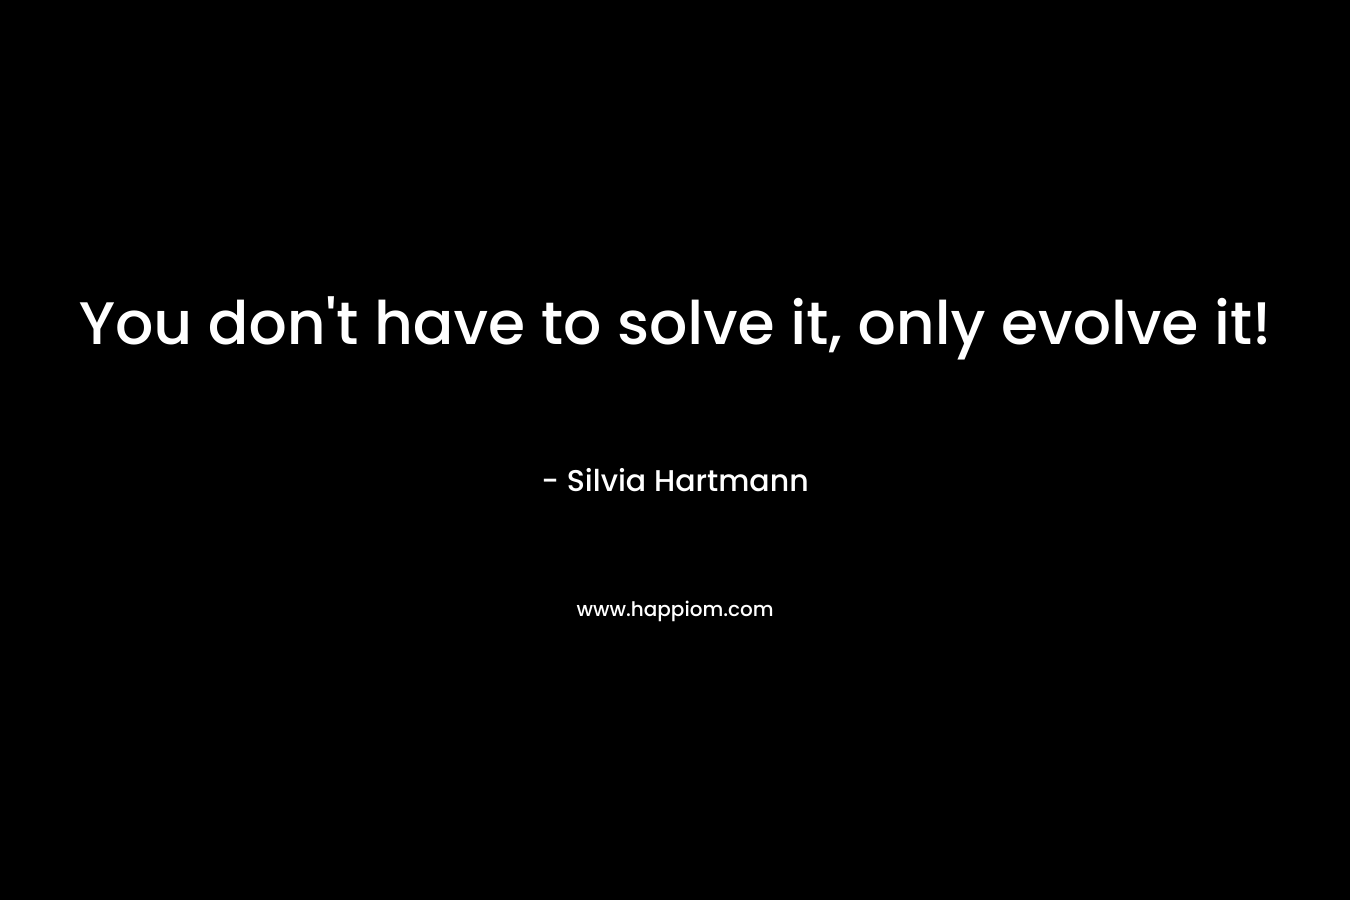 You don't have to solve it, only evolve it!